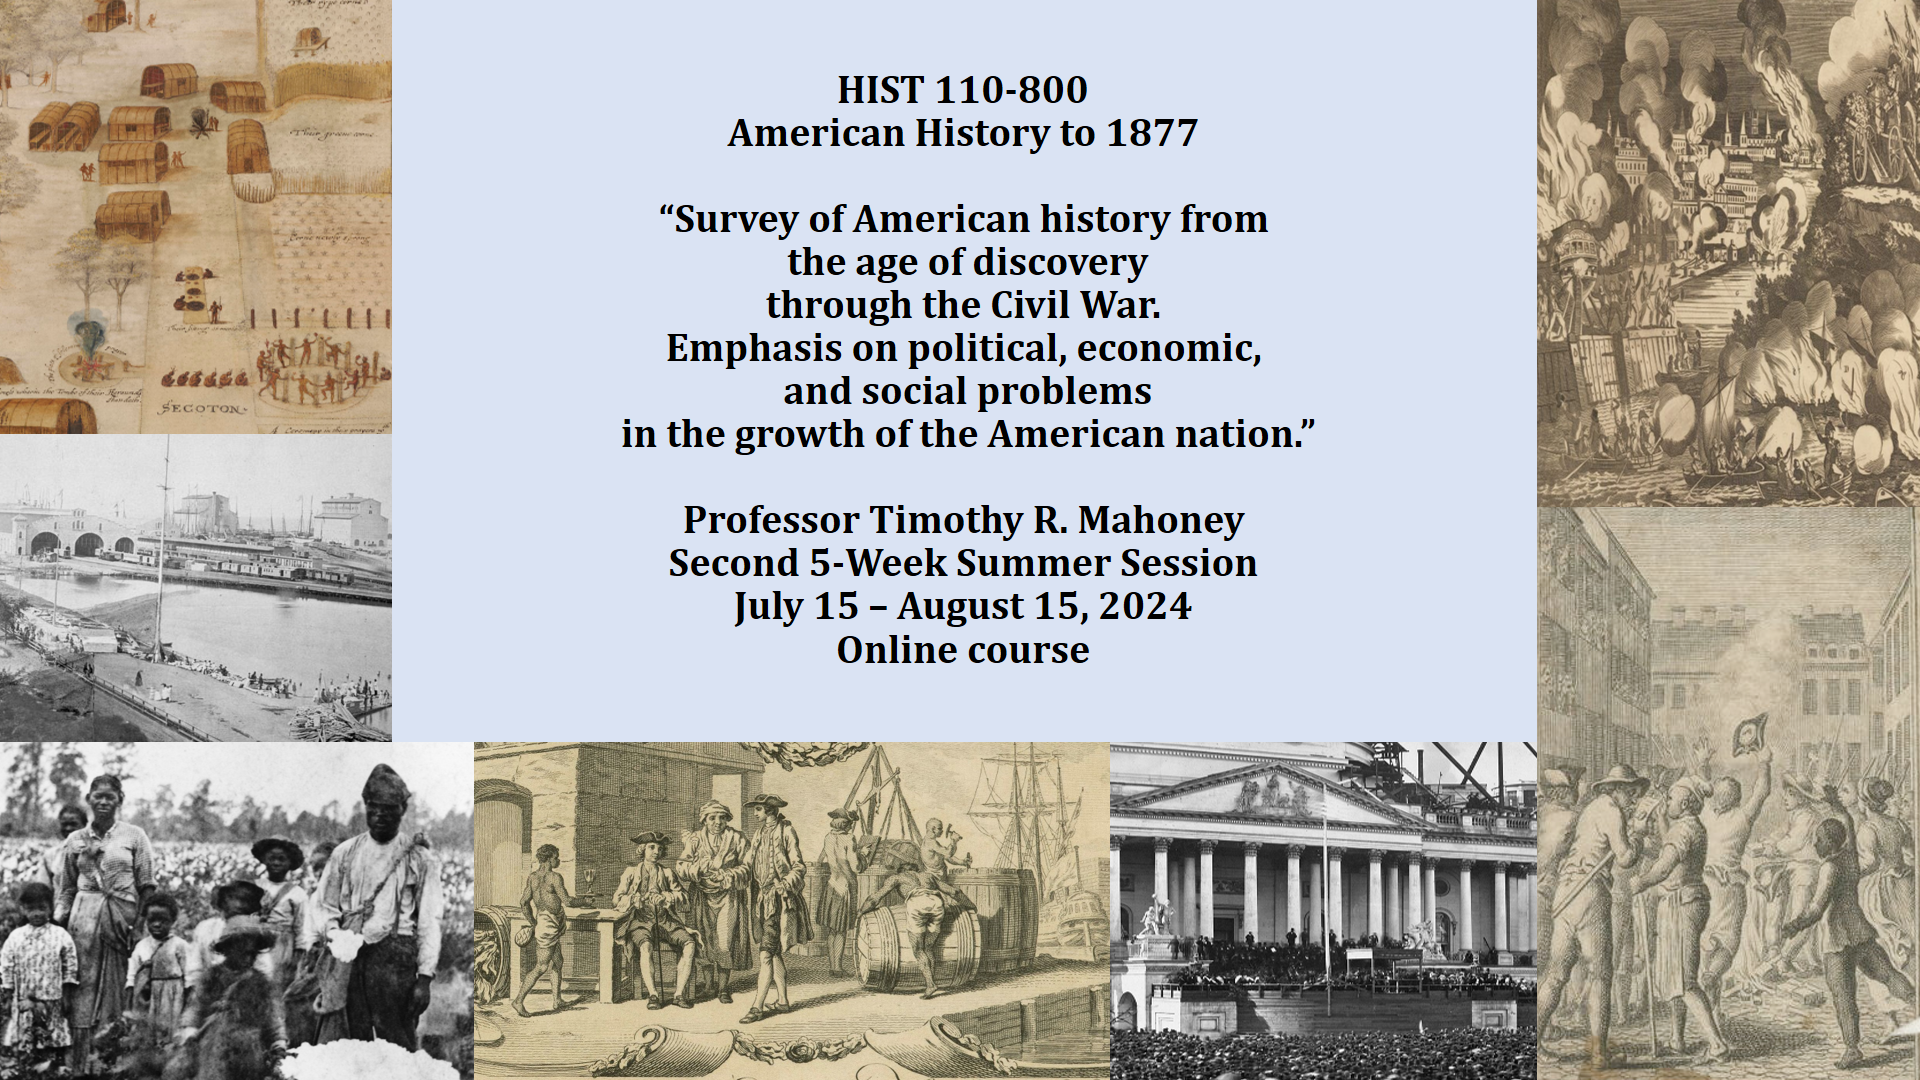 Sample Summer 2024 HIST Courses